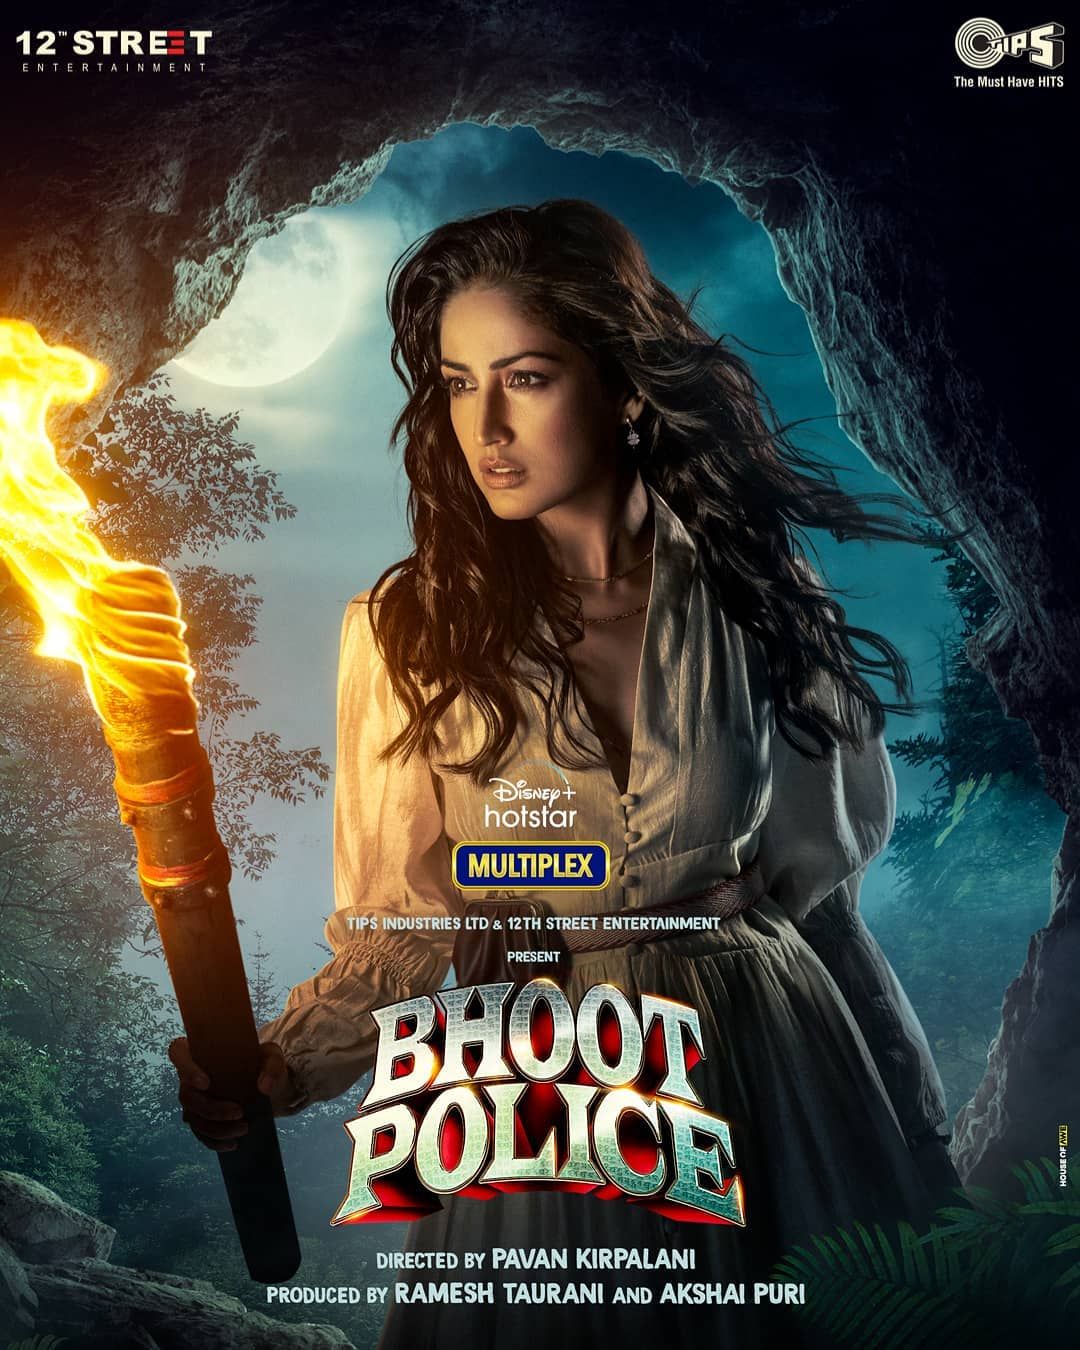 Yami Gautam feels her role in Bhoot Police has expanded her range as artist hopes to surprise the audience with the role